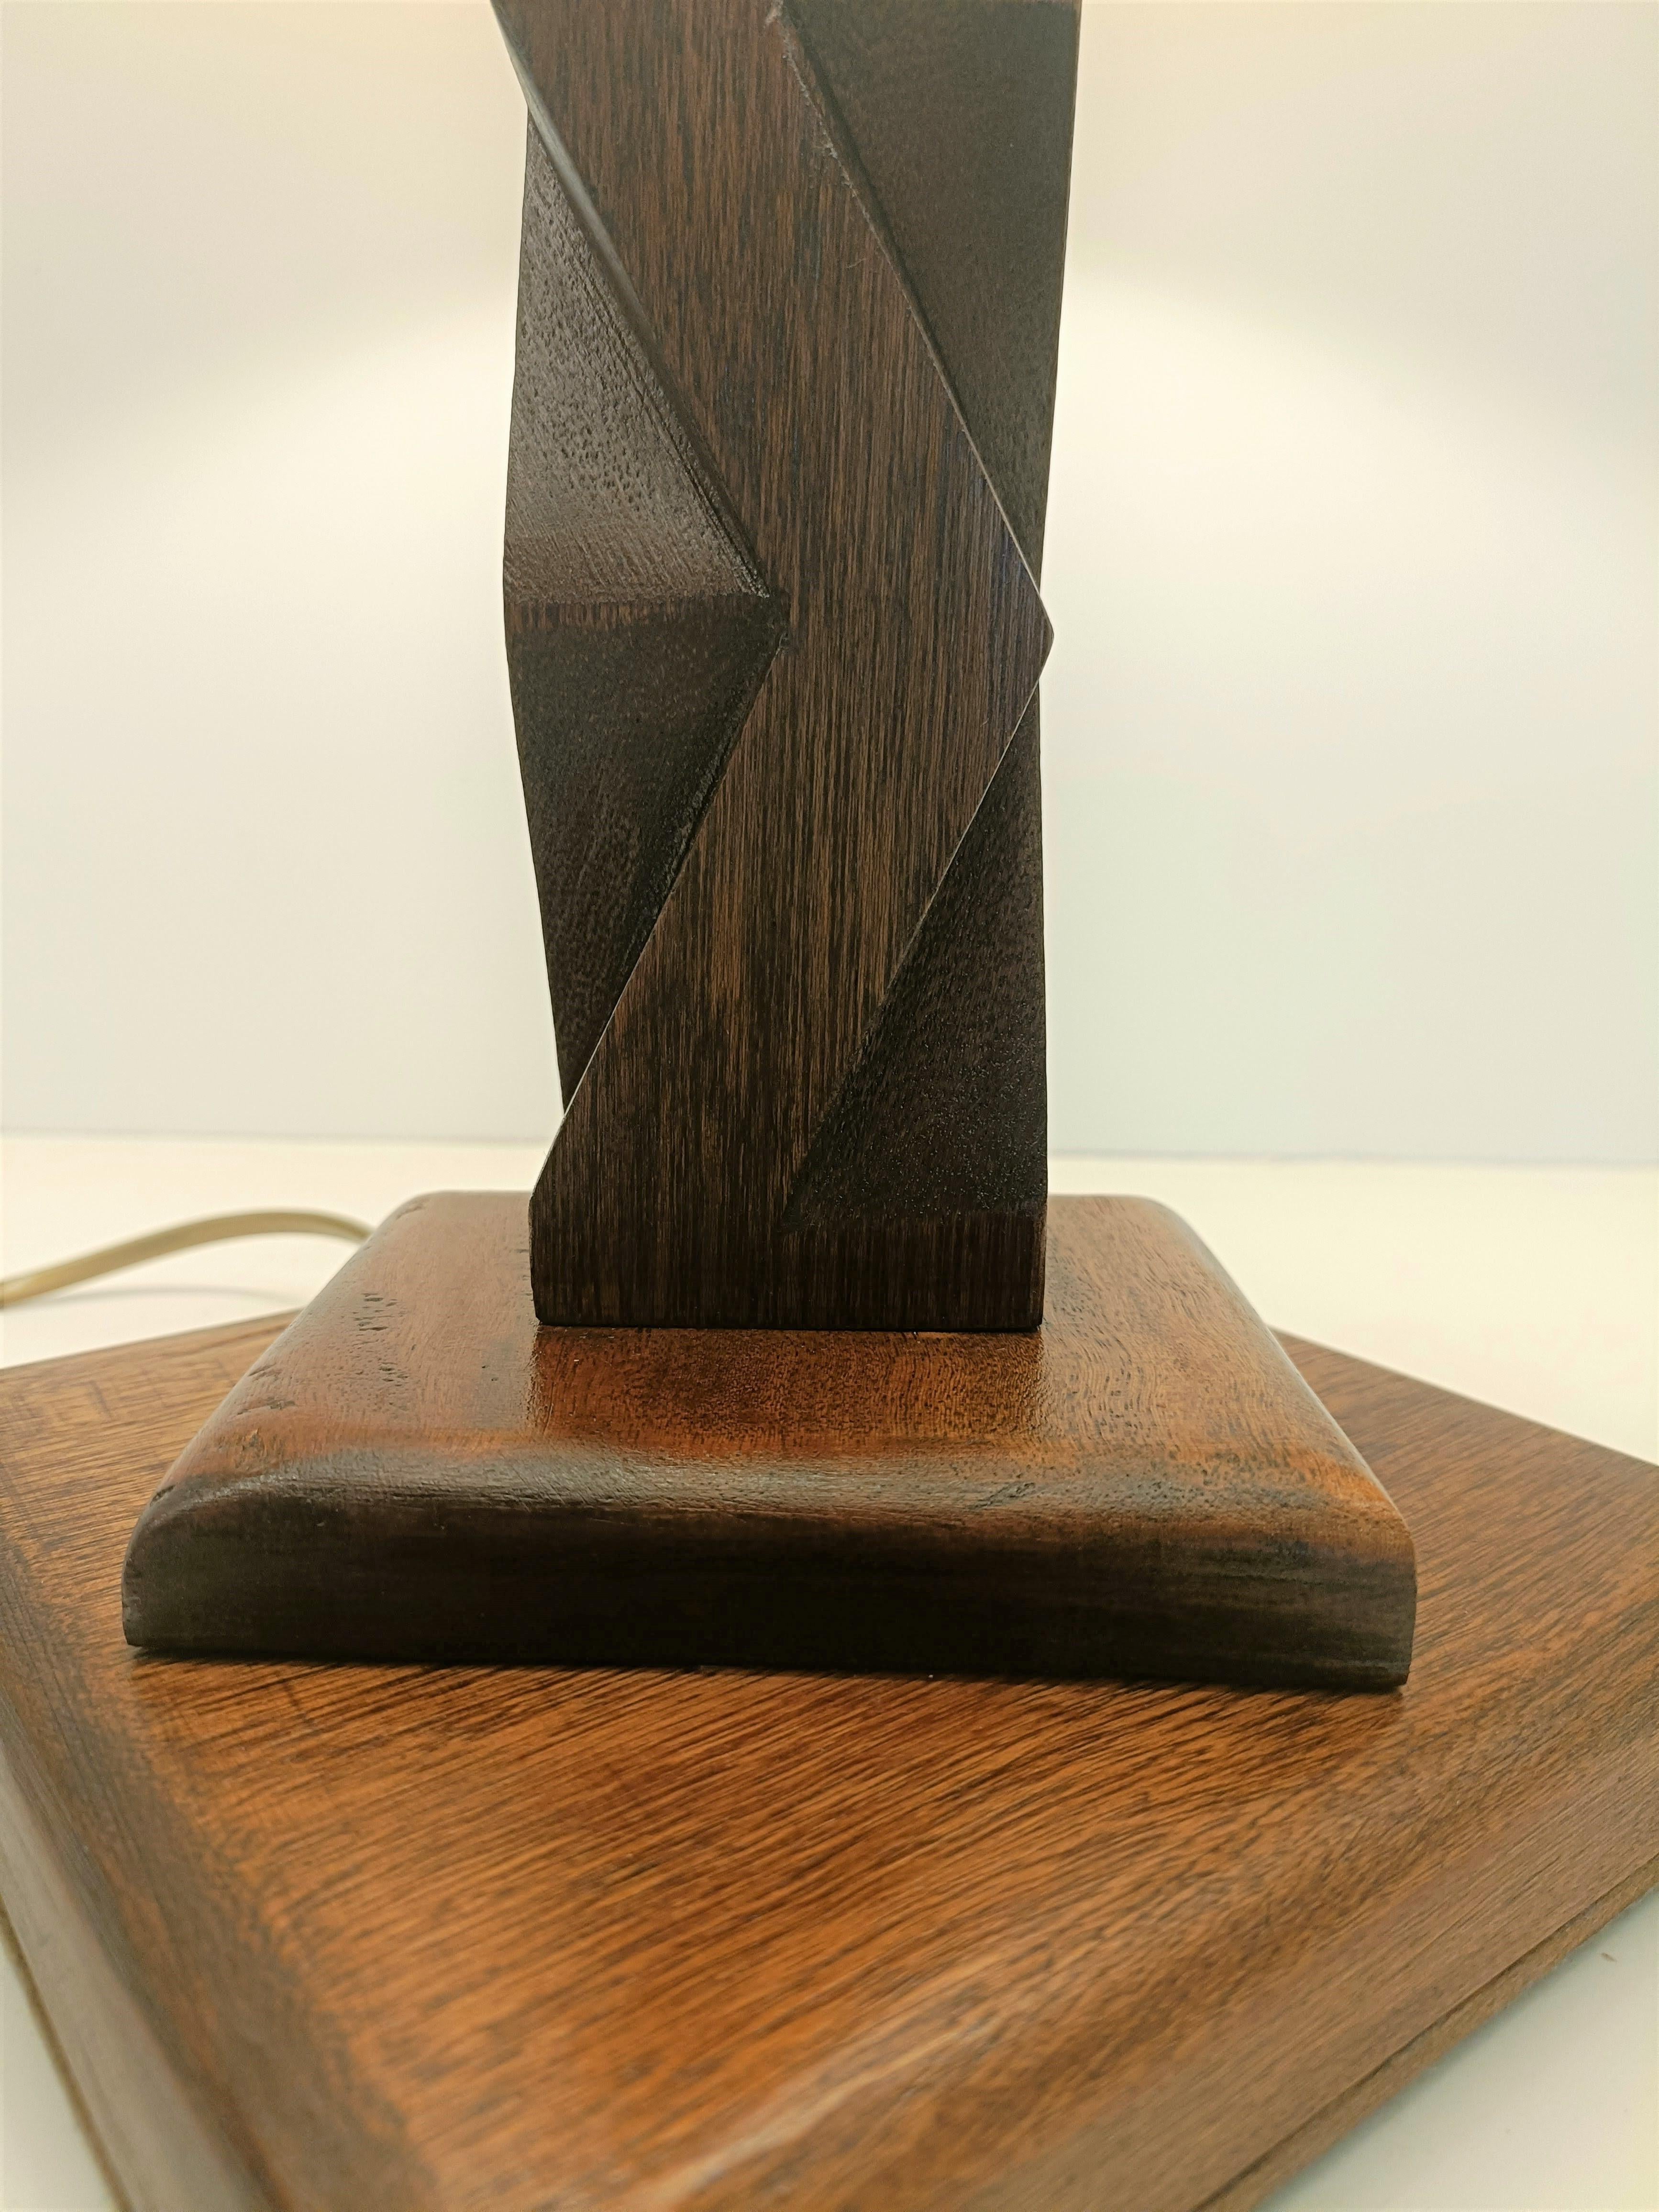 Sculptural Brutalist French Wood Lamp circa 1950 like Constantin Brancusi For Sale 6